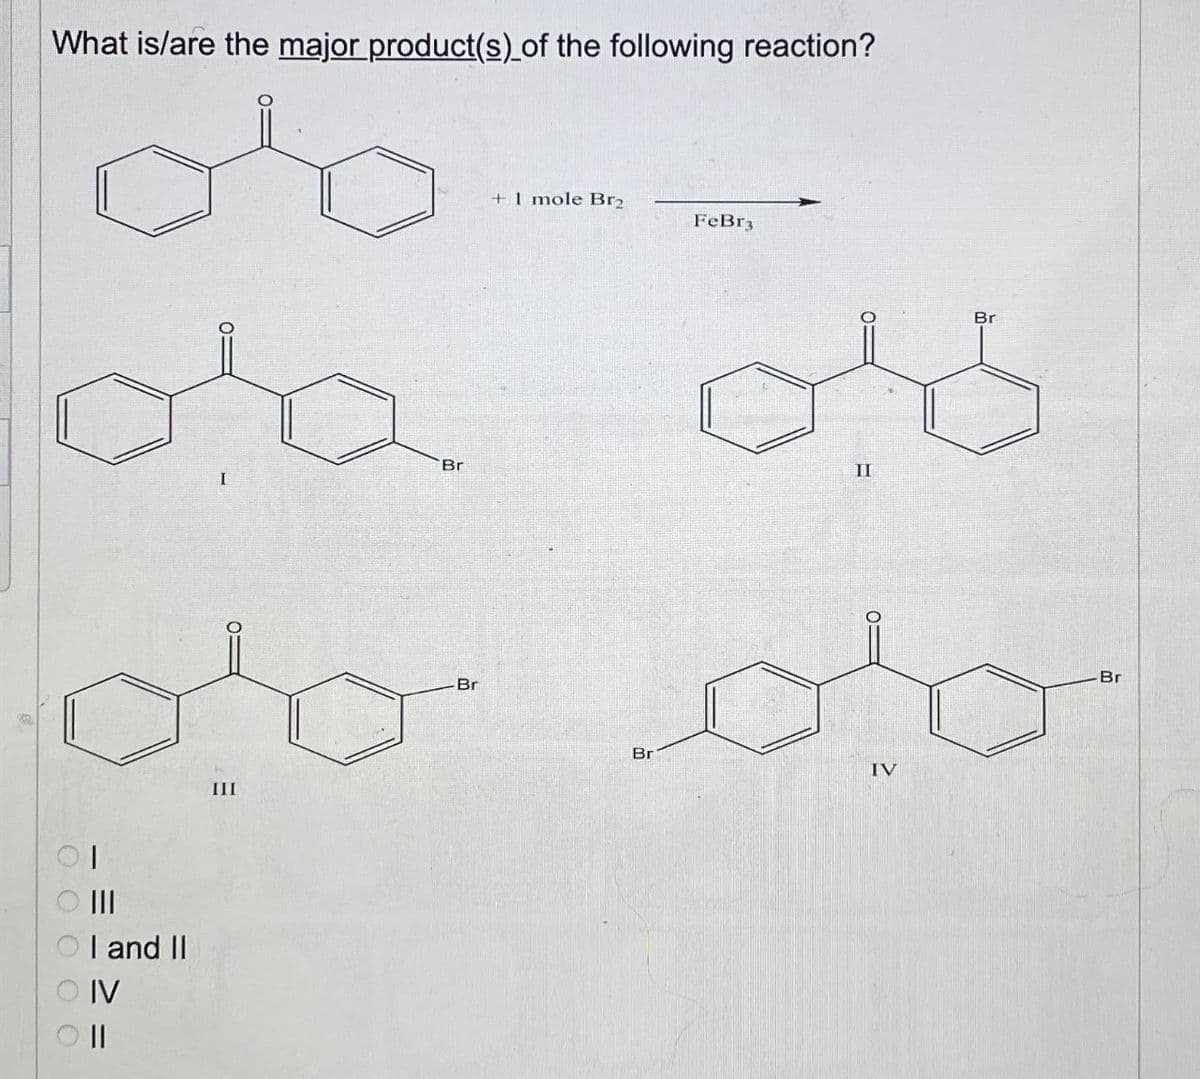 00000
What is/are the major product(s) of the following reaction?
об
+ 1 mole Br2
I
FeBr3
Br
Π
Br
до до
Ш
I and II
IV
||